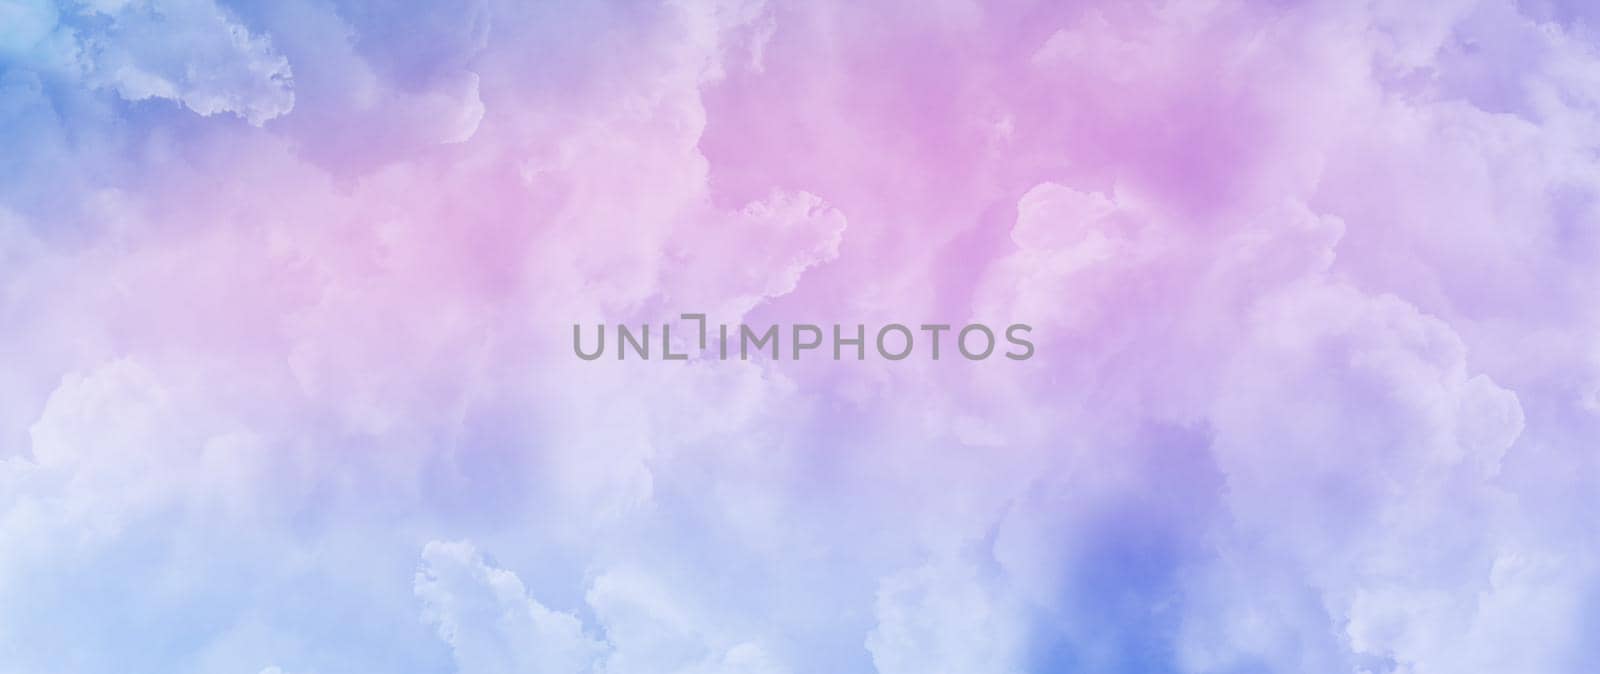 Luxurious And Watercolor Lively Multicolored Light PurpleBanner Background Wallpaper Festivity